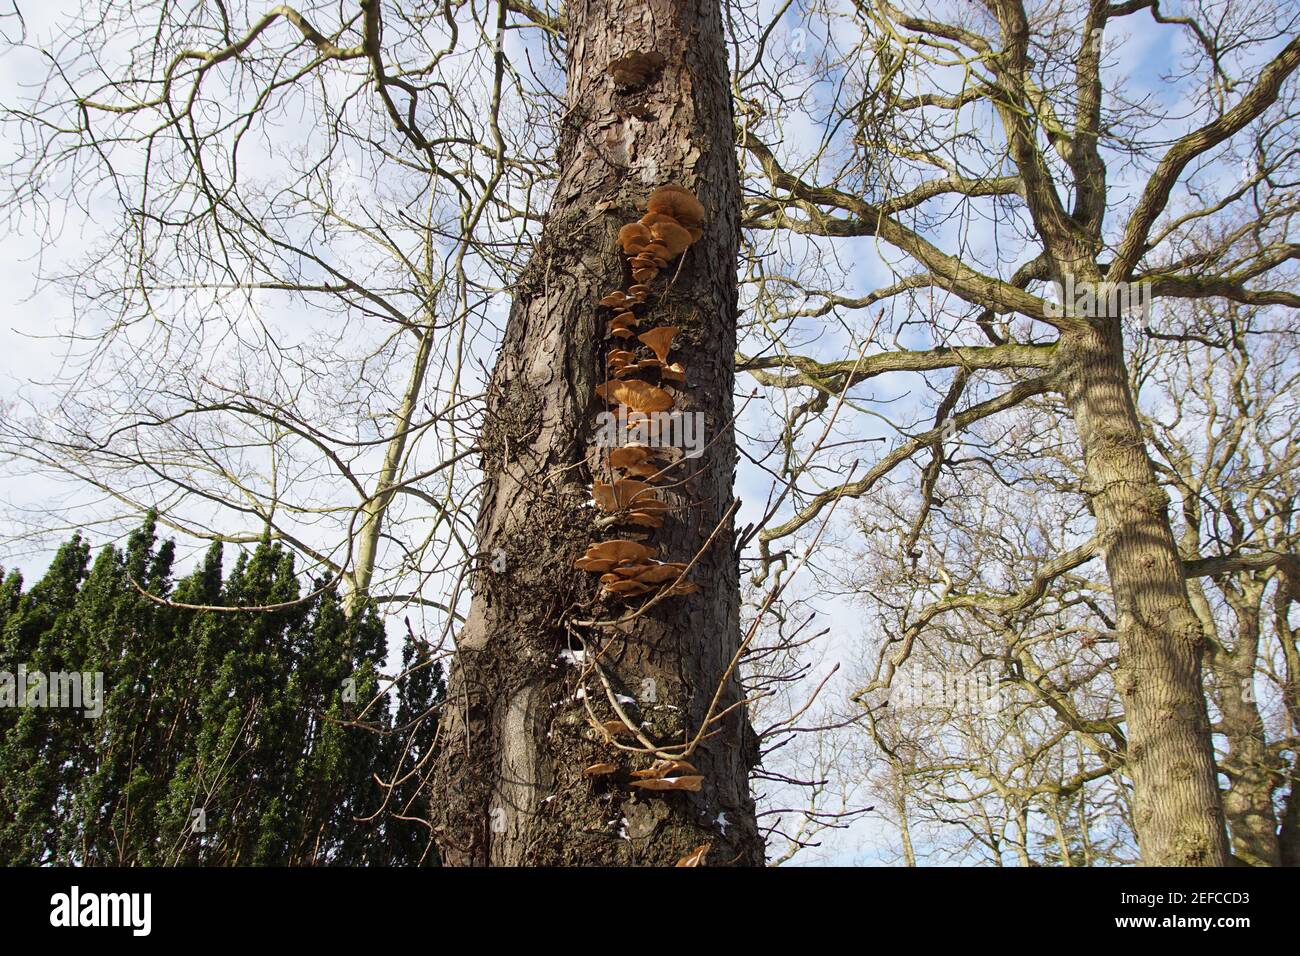 Pleurotus ostreatus, the oyster mushroom or oyster fungus. Mushrooms on the trunk of a horse chestnut tree in the Dutch village of Bergen in winter. Stock Photo